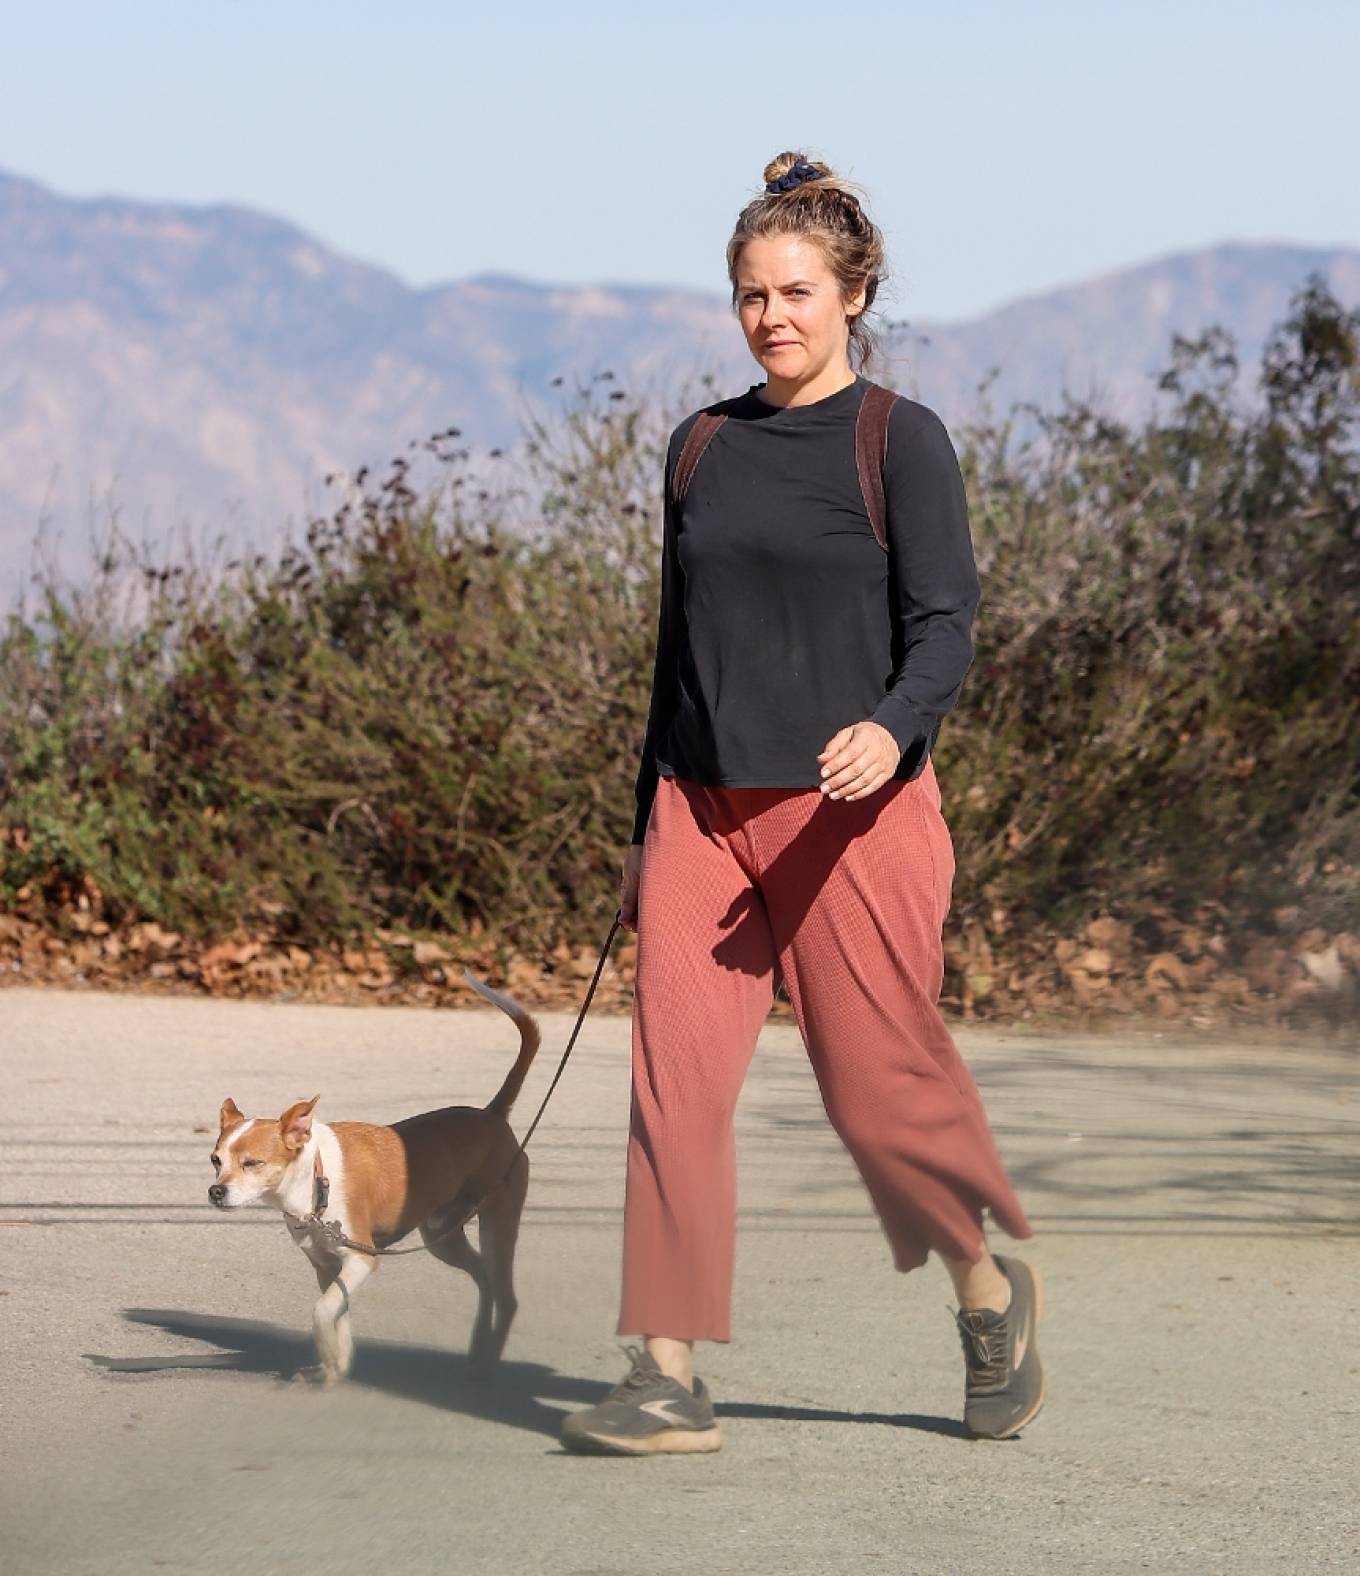 Alicia Silverstone 2021 : Alicia Silverstone – Seen while takes her dog for a walk-08